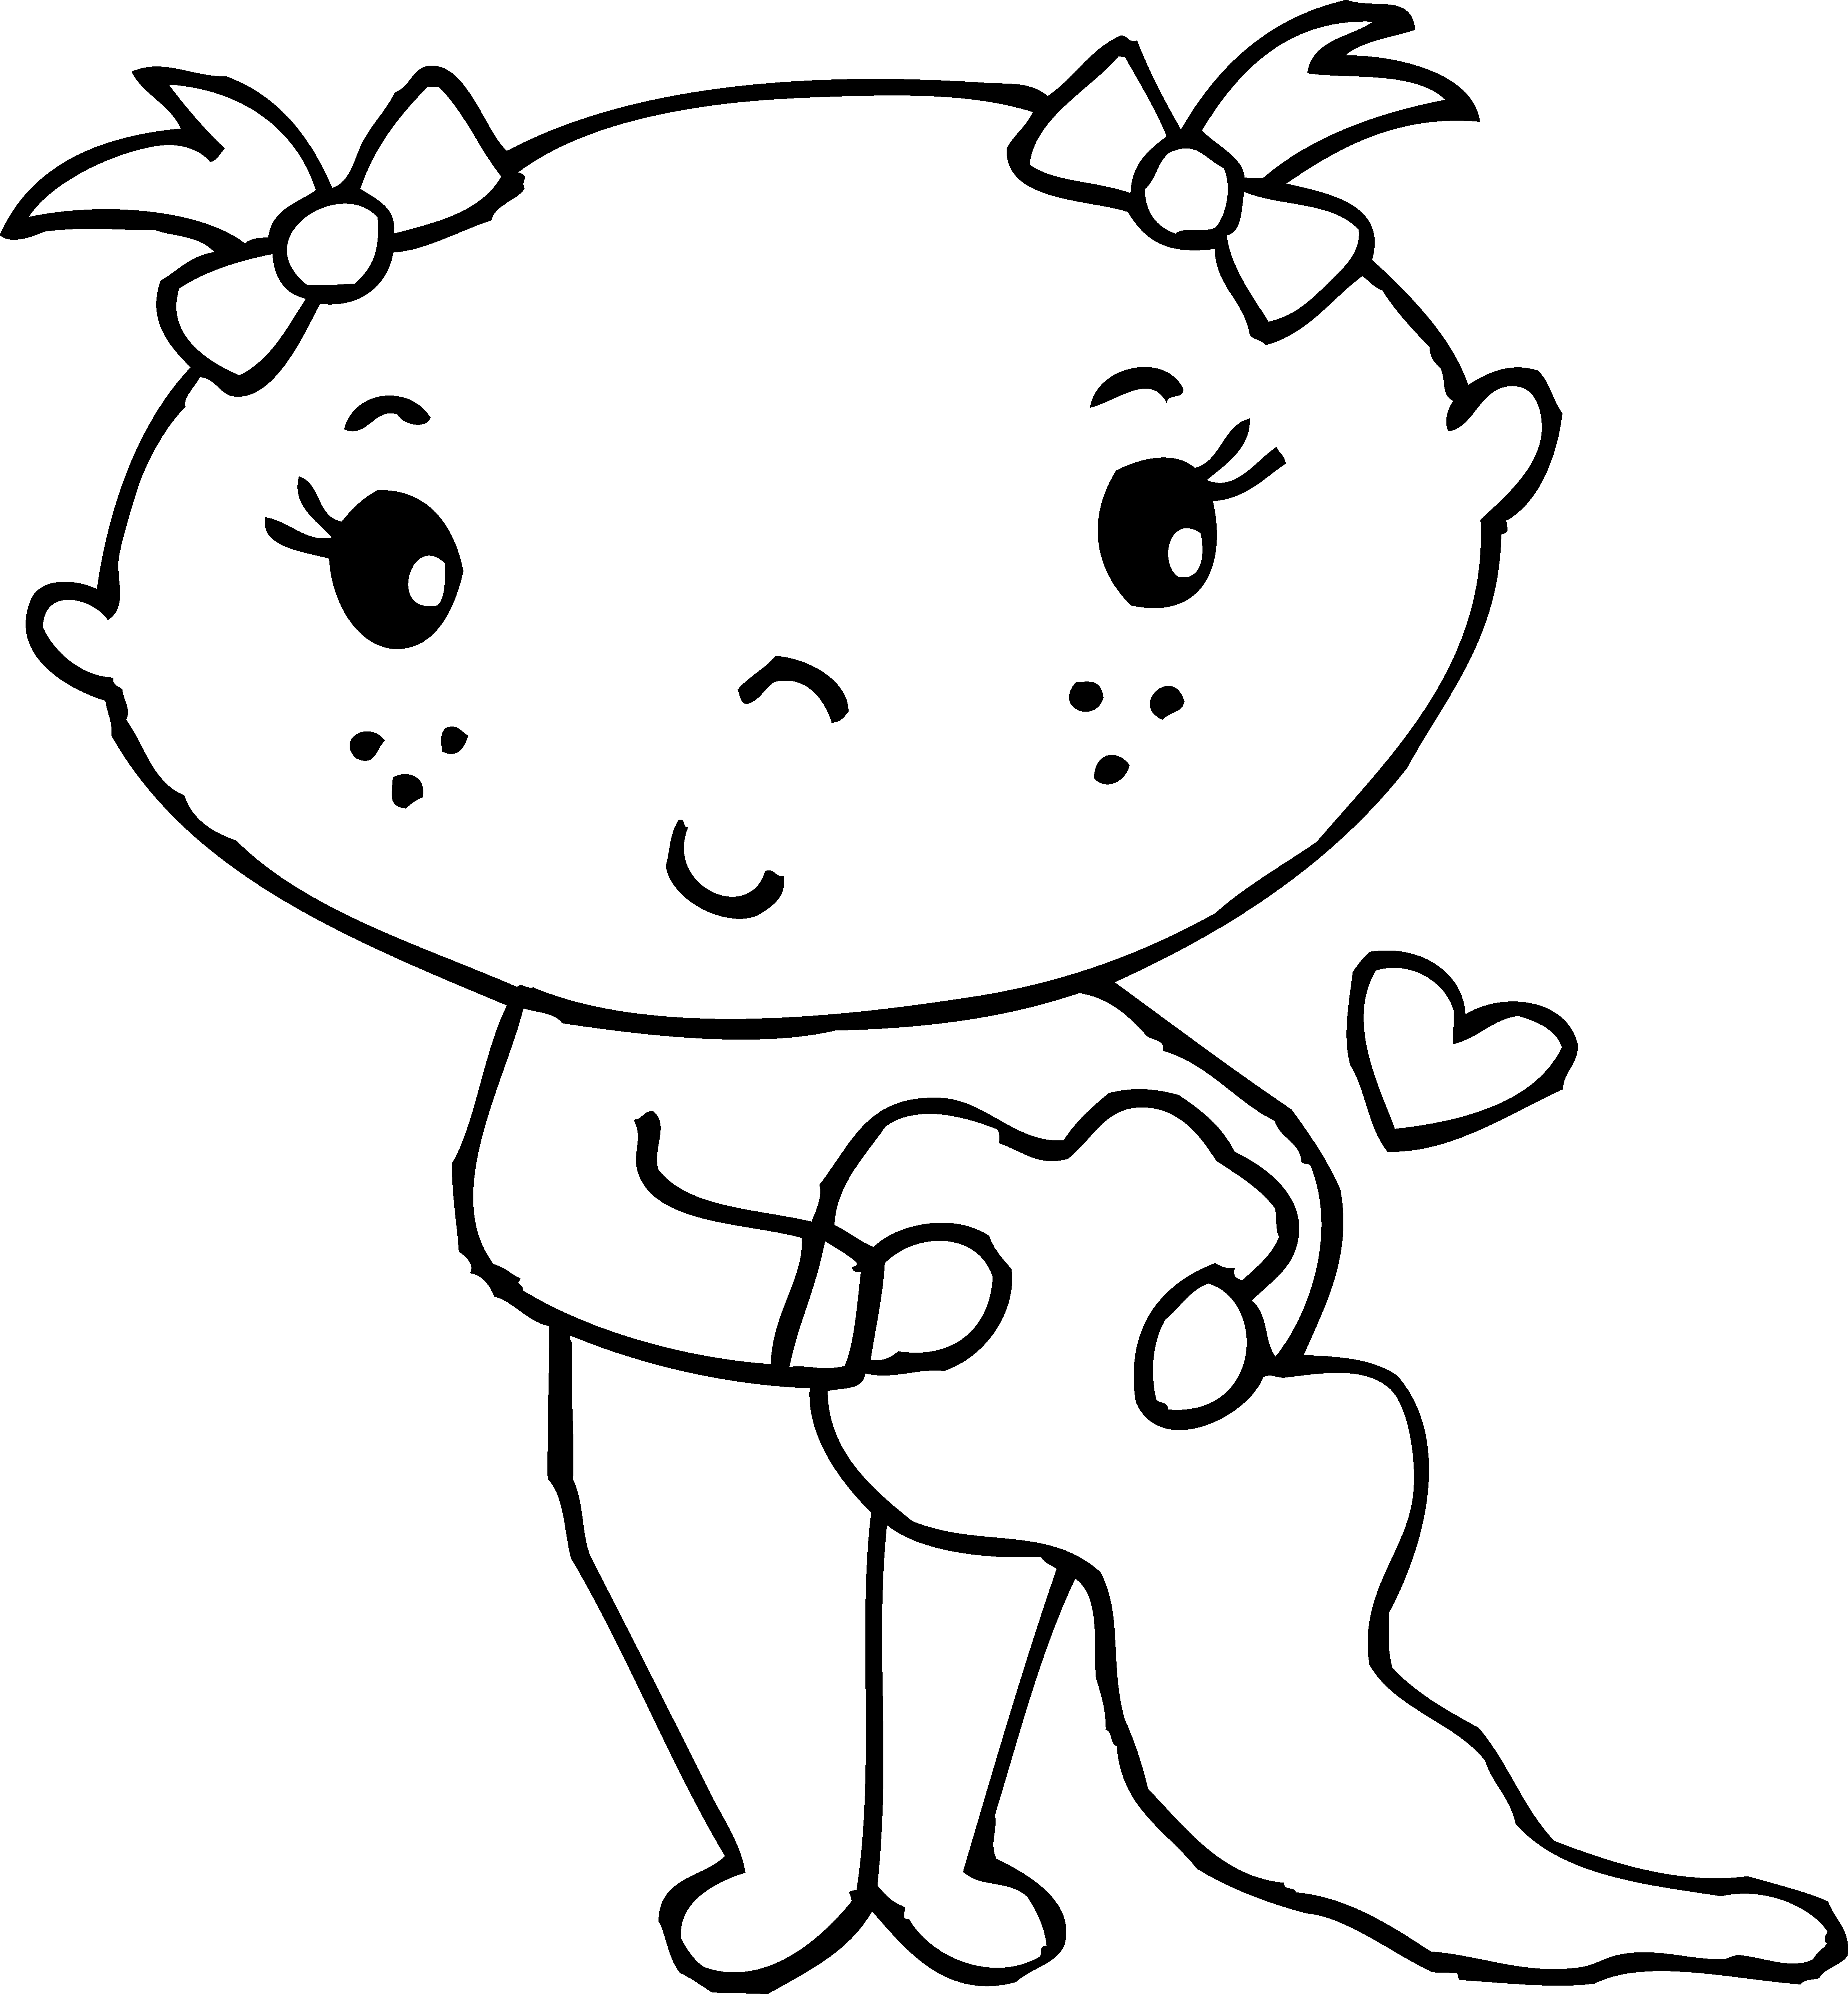 blanket clipart coloring page